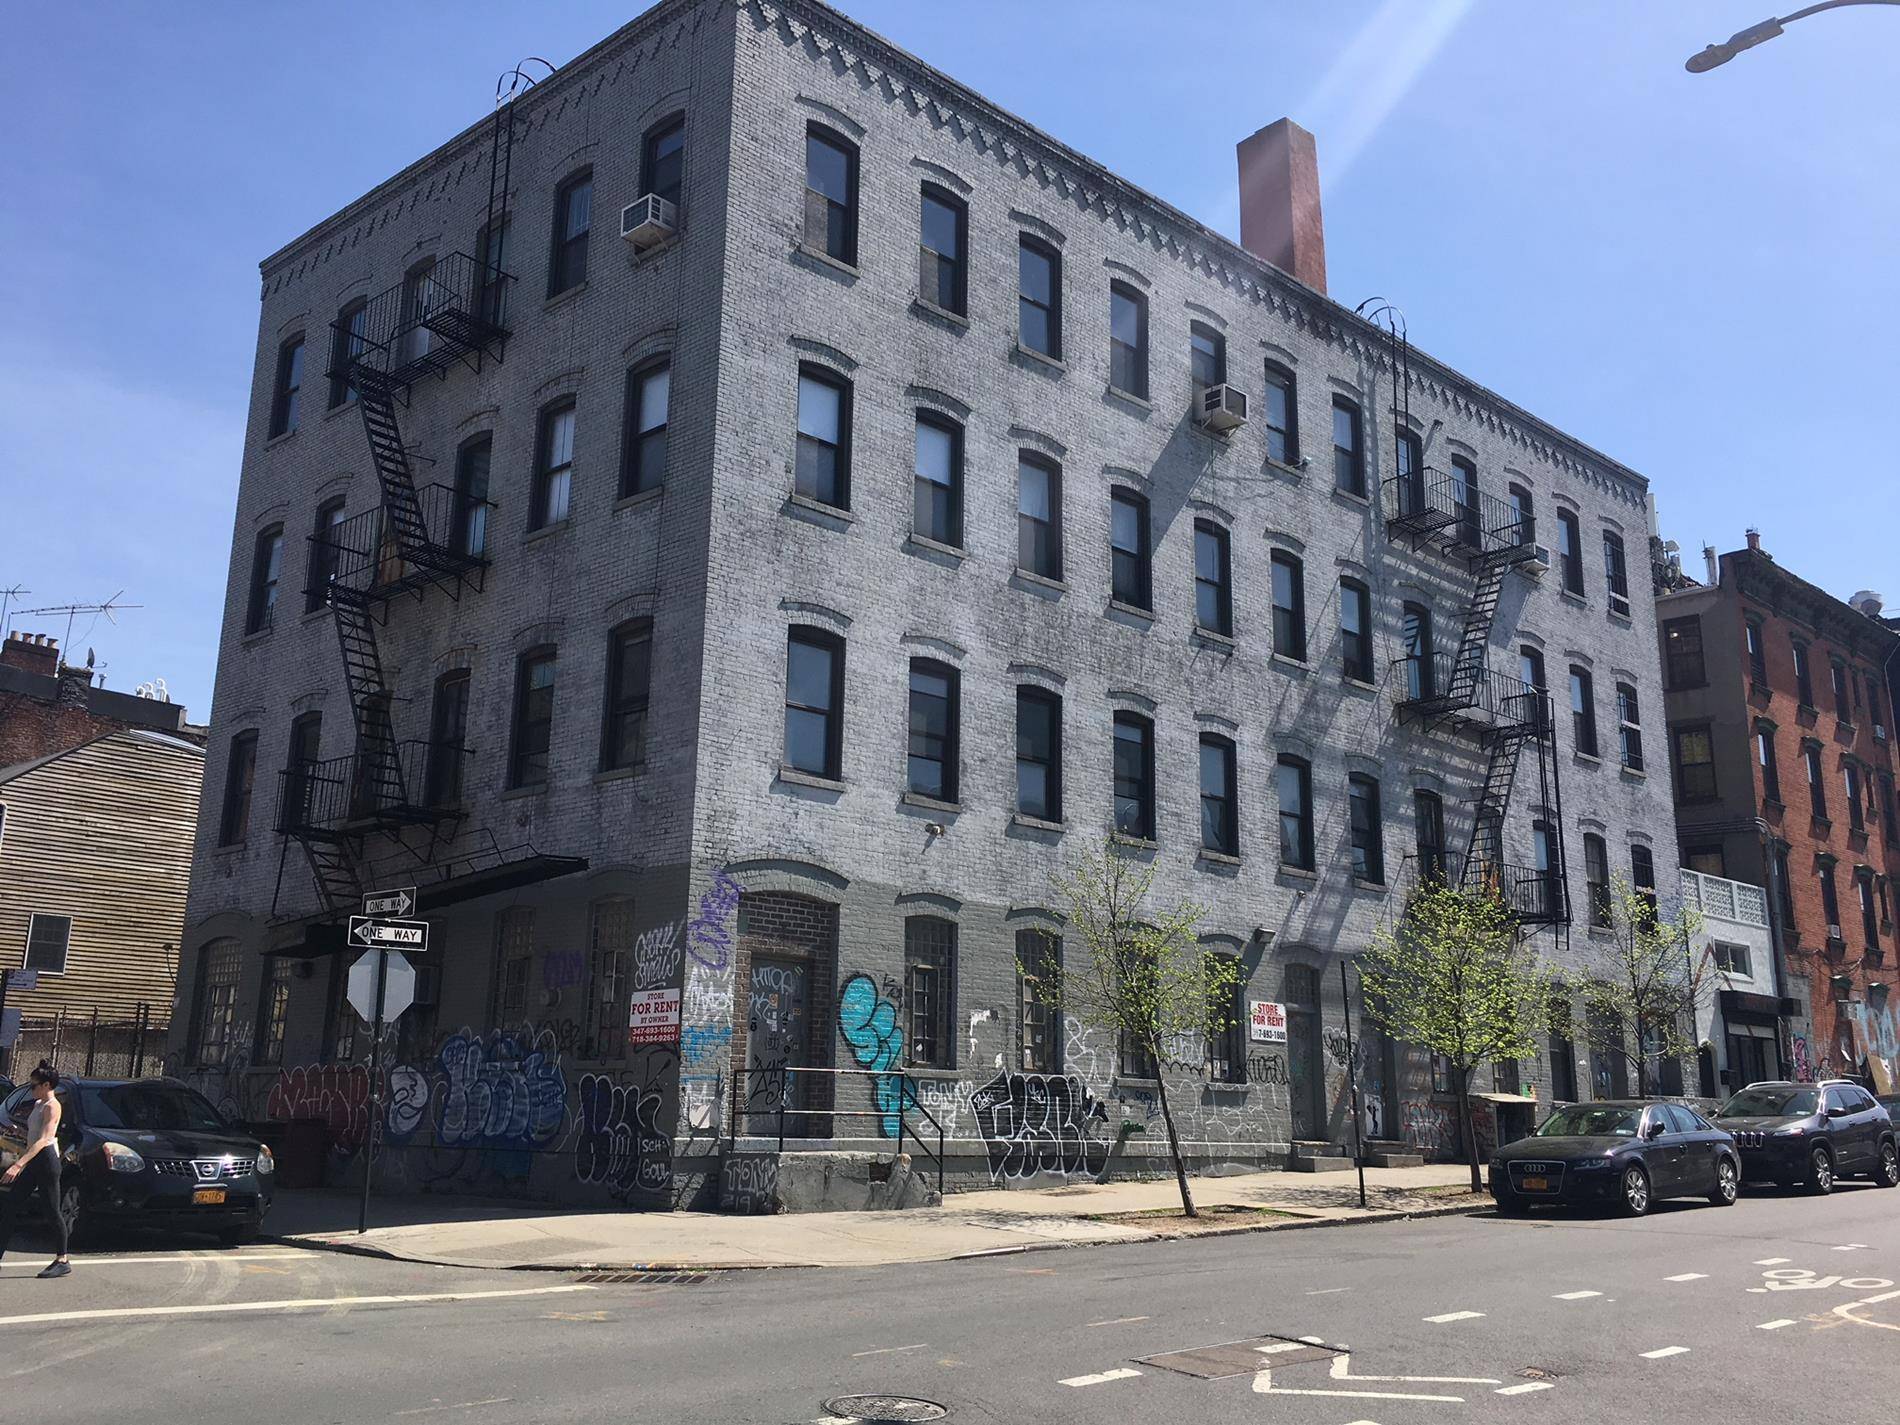 Loft building in Prime Williamsburg with 5 IMD Loft Law tenants, one on 1st floor, two on third floor and two on fourth floor.